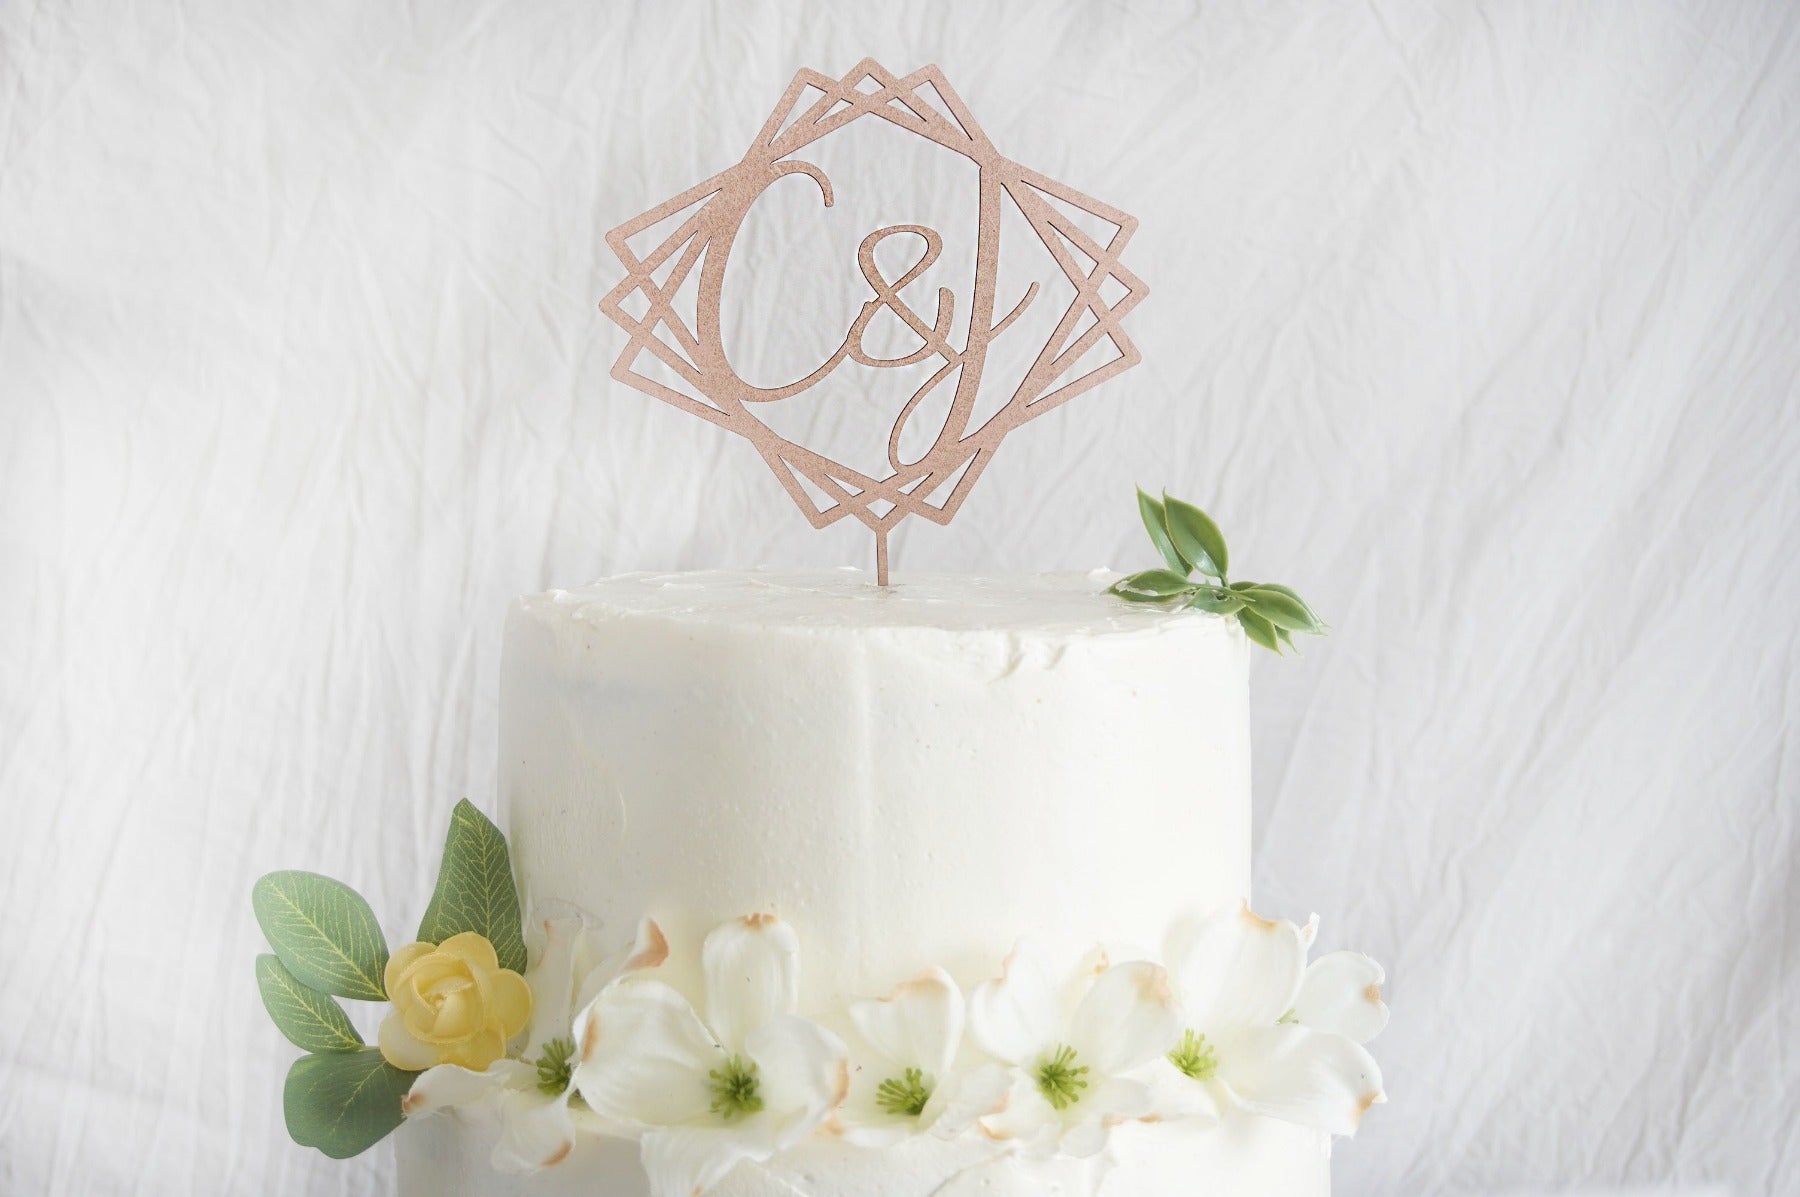 Geometric Wedding Cake Topper | Custom Cake Toppers Personalized | Made in Wood or Acrylic, Cake Toppers, designLEE Studio, designLEE Studio